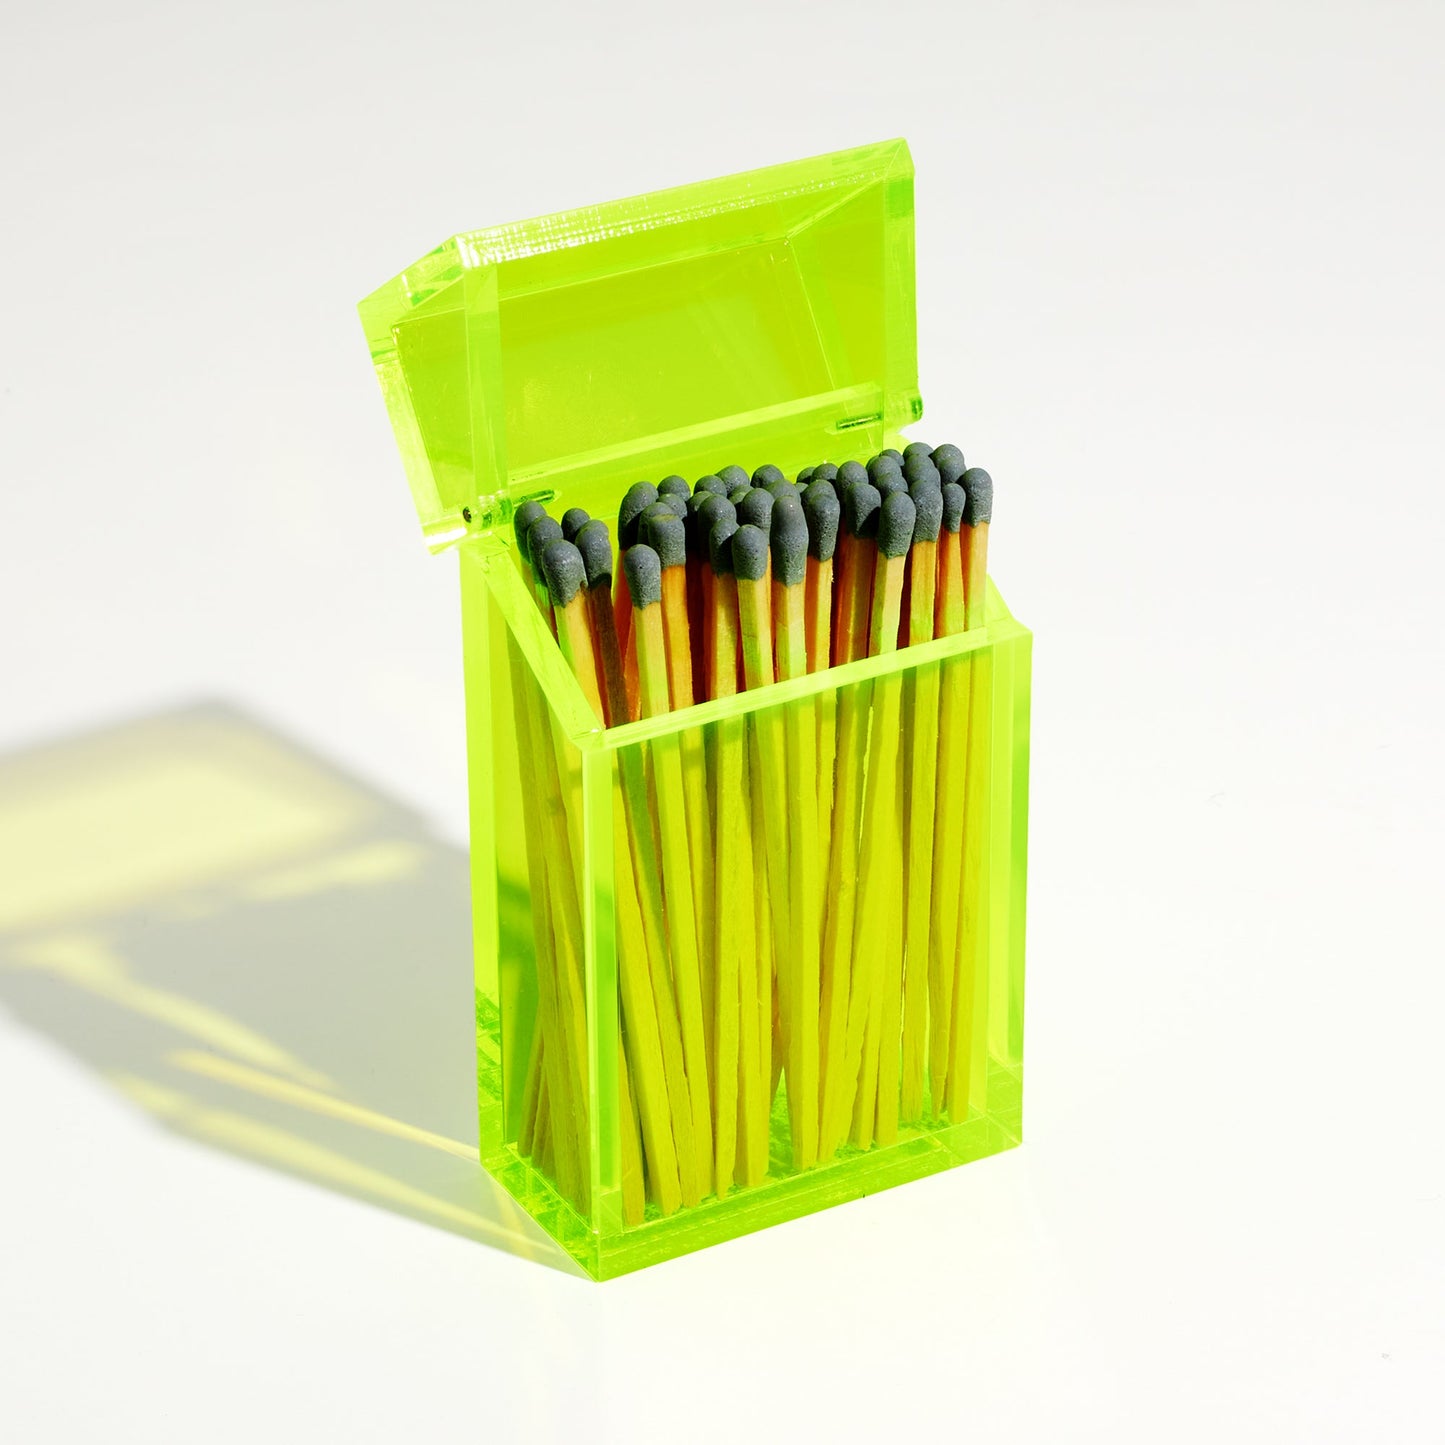 Opened Opened Match holder shaped like a Cigarette Case. Made with neon green acrylic. Case holds Gray matches in it.